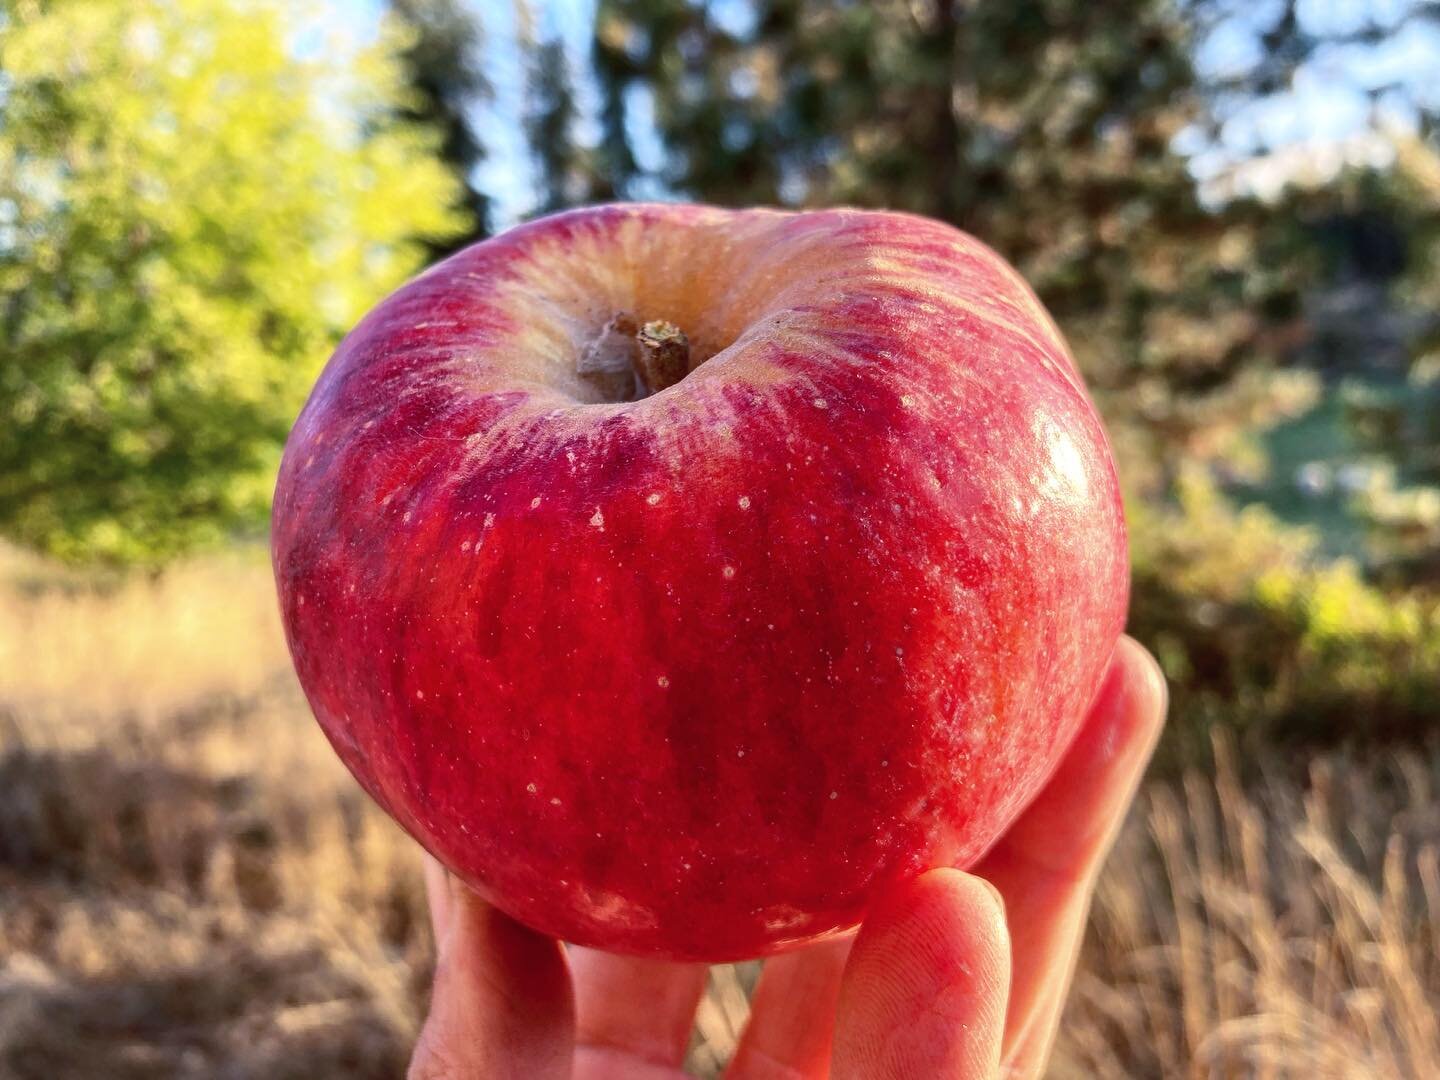 Beautiful Topaz apples from @boothcanyonorchard this week &mdash; deliciously tart with a hint of sour cherry! 

The #methowgrown bounty continues as we deepen into Fall 🍂🍎🍁
..
#mvfoodshed #winthropwa #twispwa #foodhub #heirloomapples #eatlocal